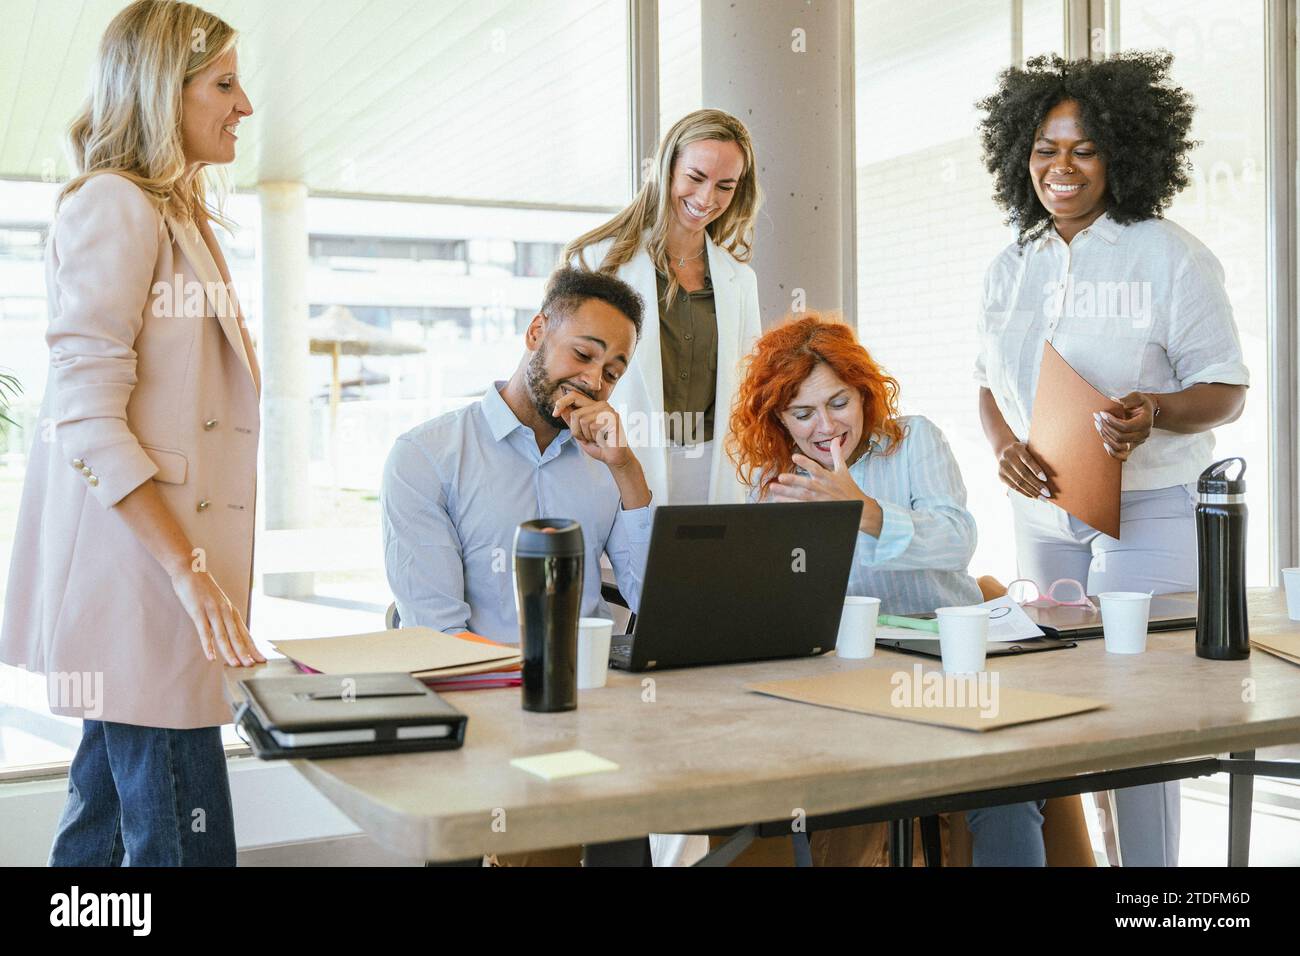 Diverse group of business people smiling while working together at the office. Business concept. Stock Photo